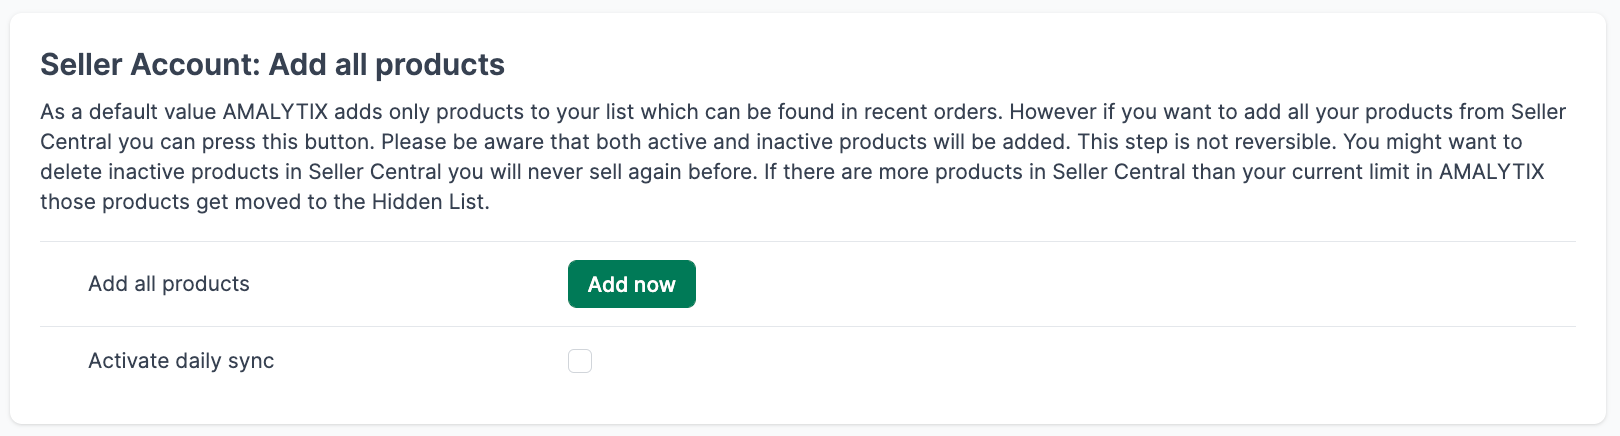 Add all products from seller central in AMALYTIX